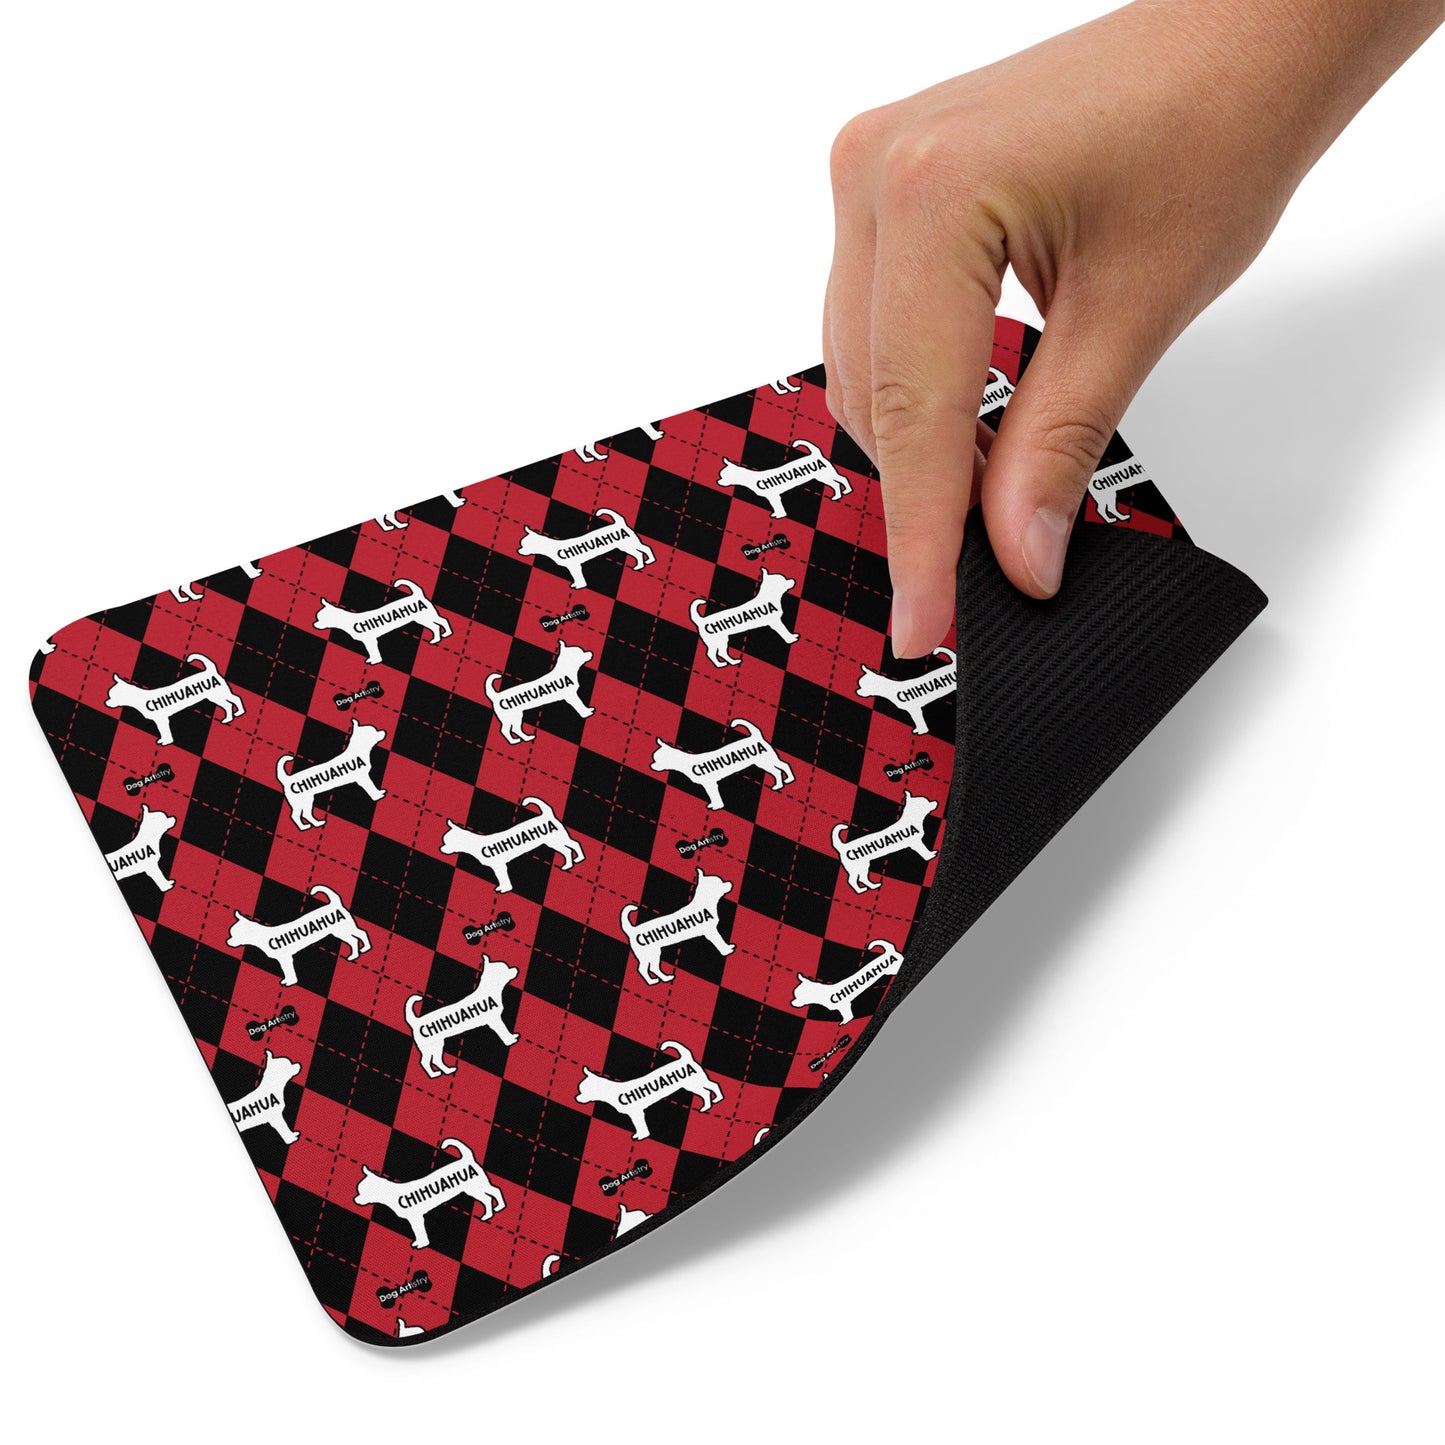 Argyle Chihuahua Red Mouse pad